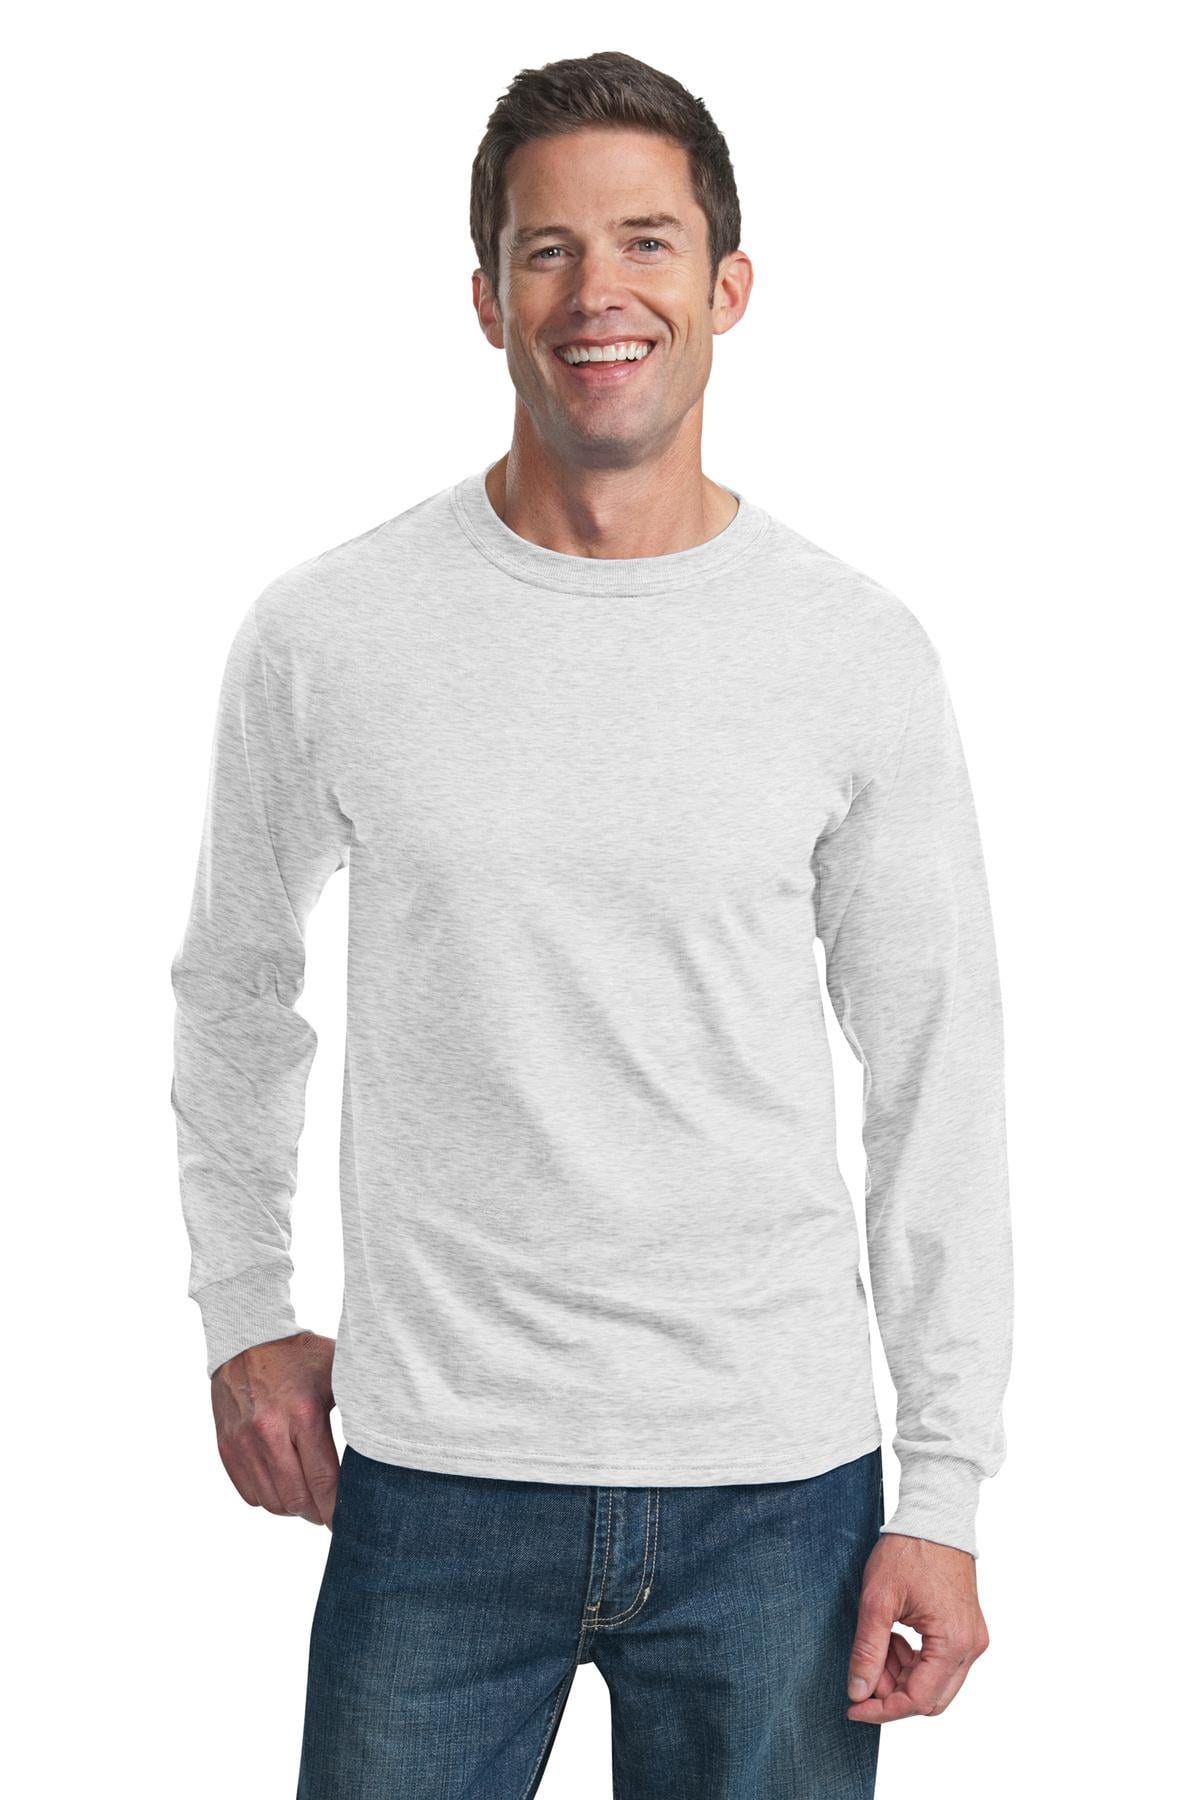 Fruit of the Loom - Fruit of the Loom Men's 100 Percent Cotton Long ...